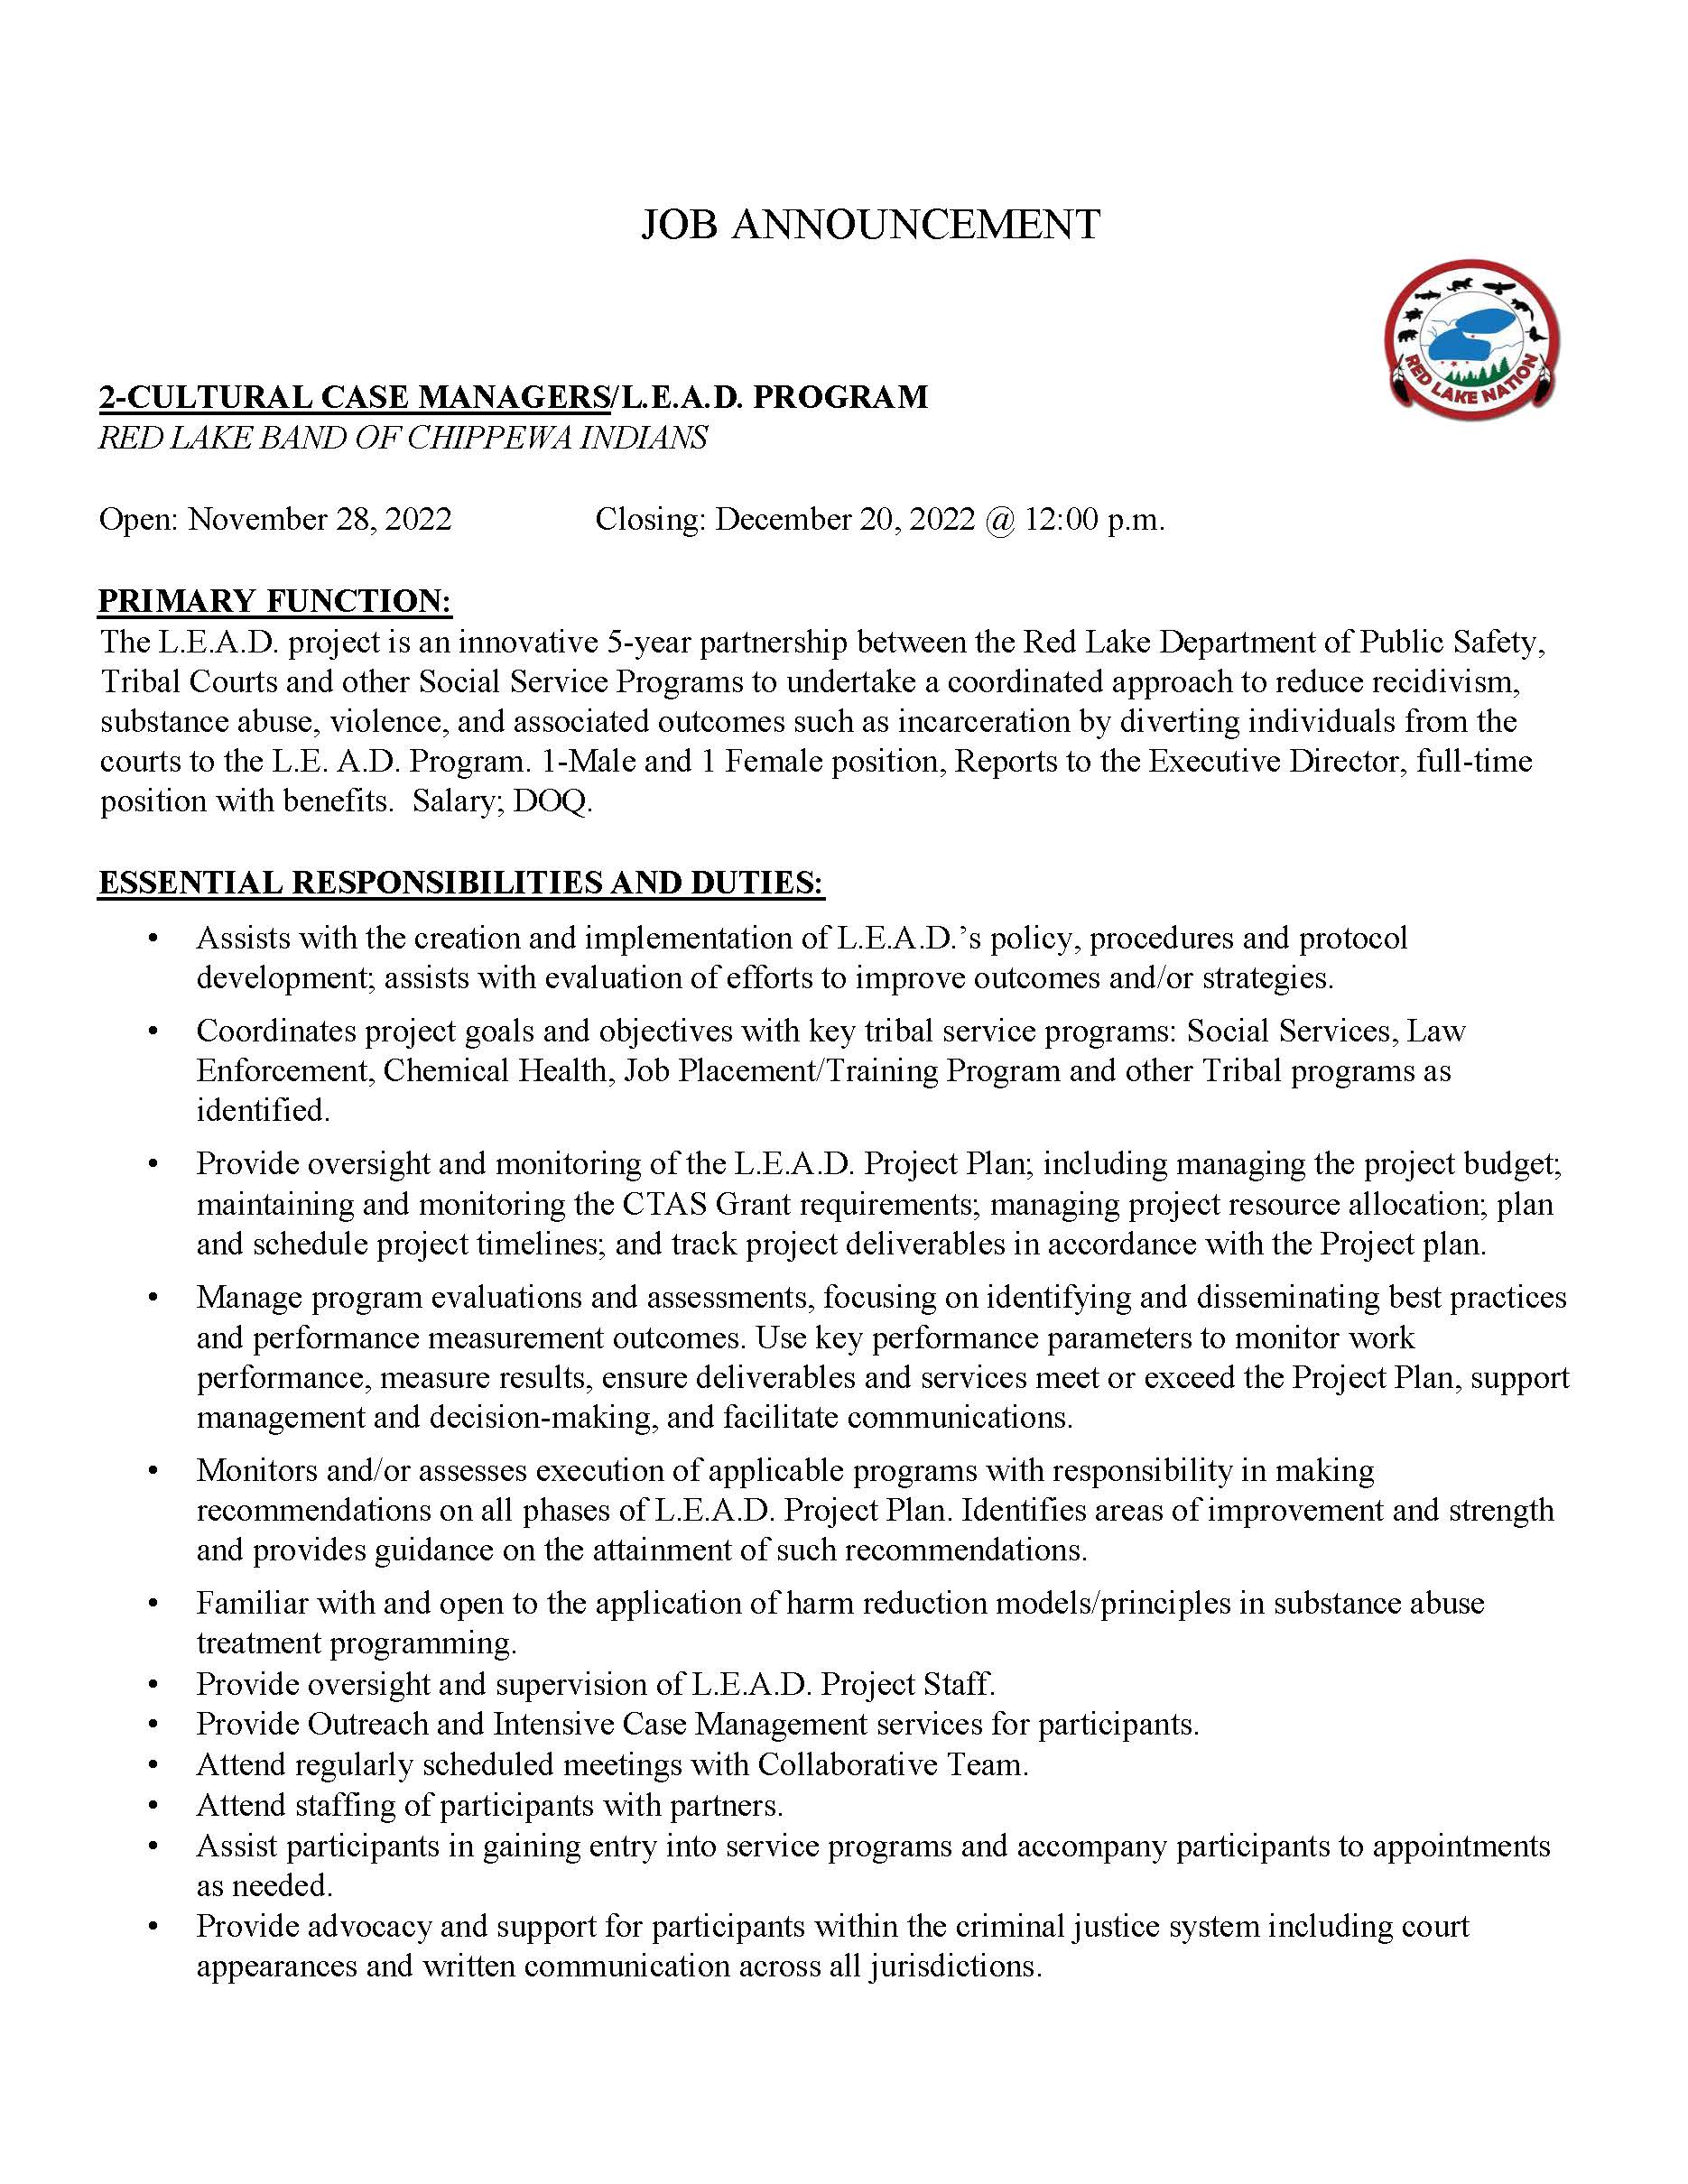 2-Cultural Case Managers-LEAD Program-Red Lake Band of Chippewa Indians-Job Posting 11-28-2022_Page_1